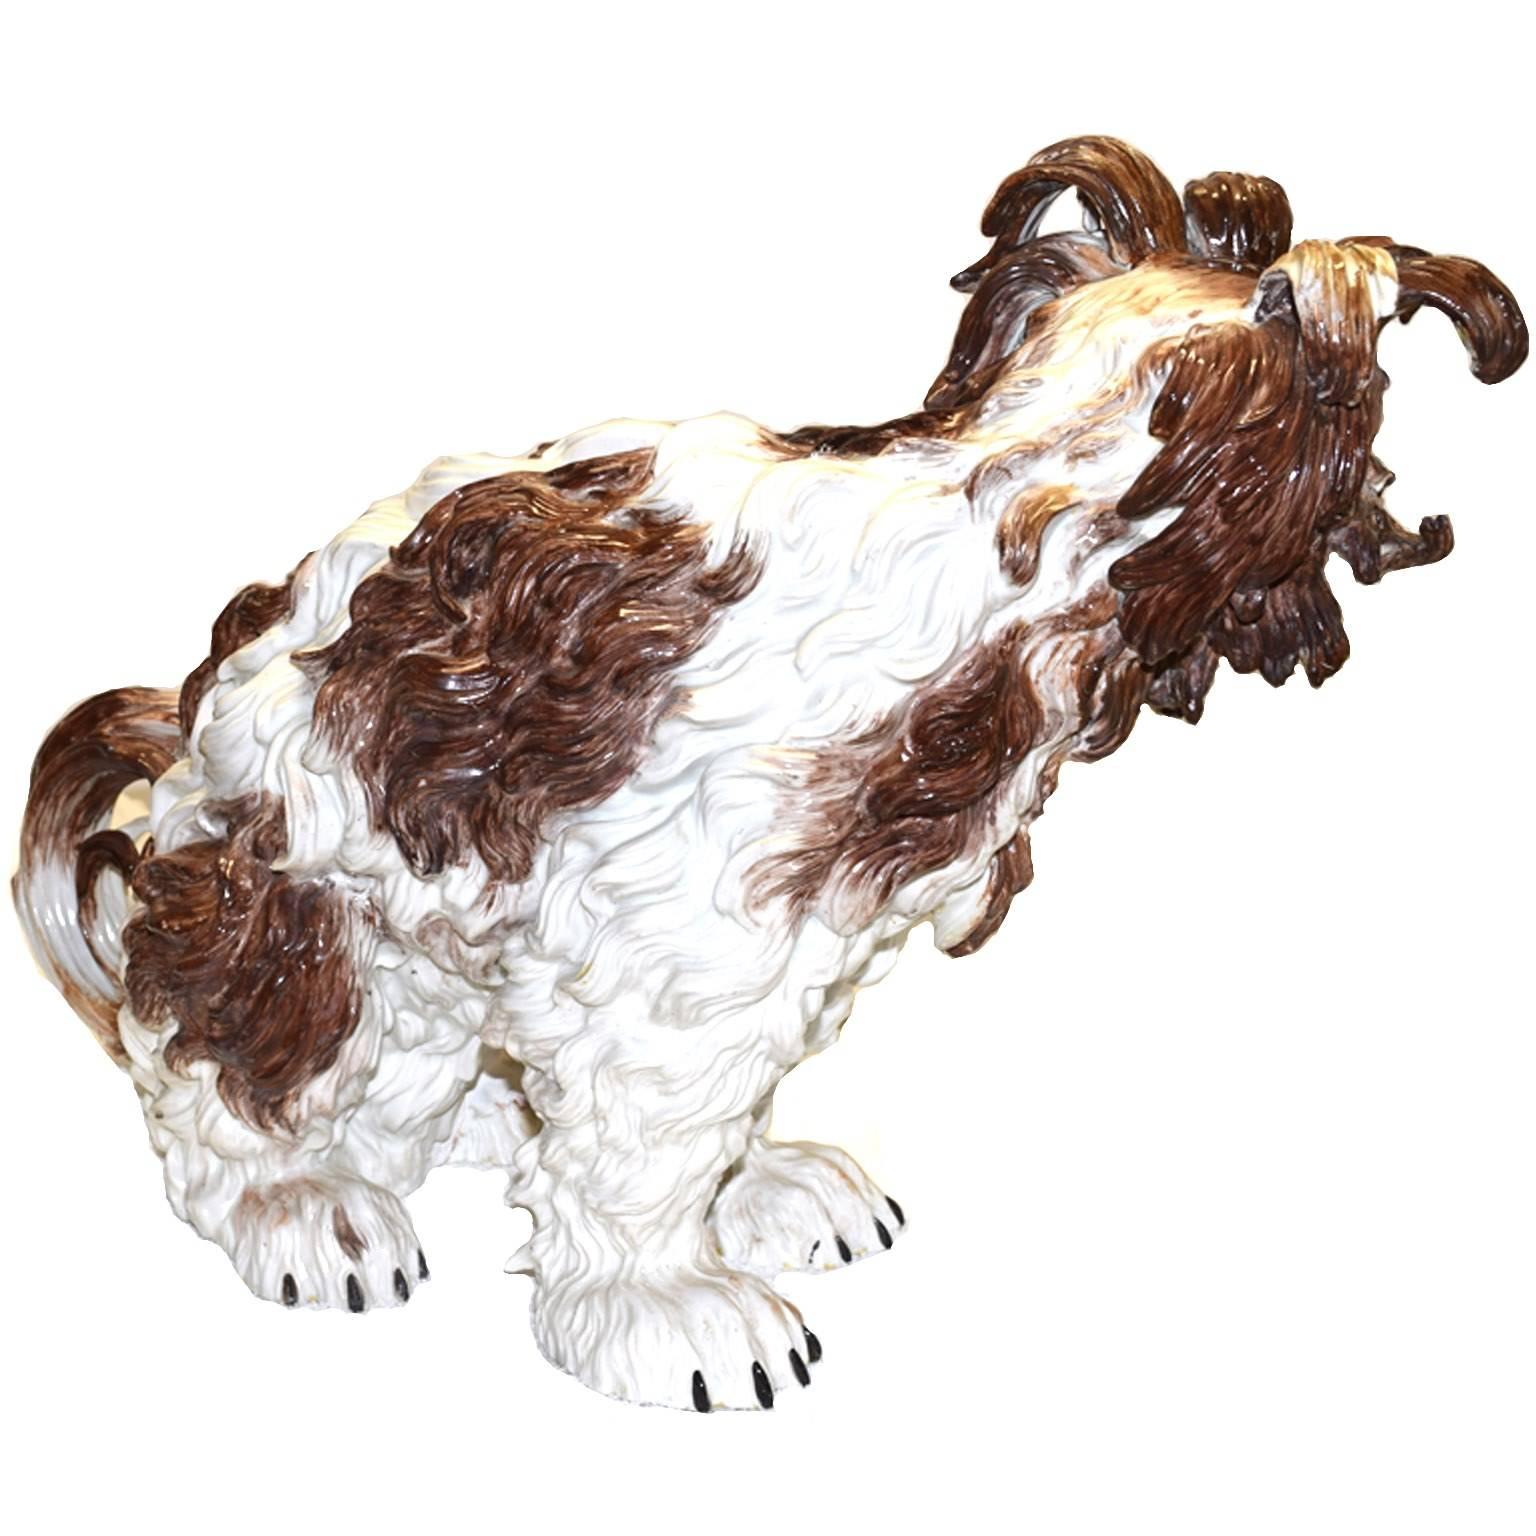 Rare antique German Dresden porcelain model of a Bolognese hound; seated on his haunches, seated to the left, with incised fur, fine black and brown markings, tail curled, white muzzle, articulated raised front paws, with black nails, circa 1880.